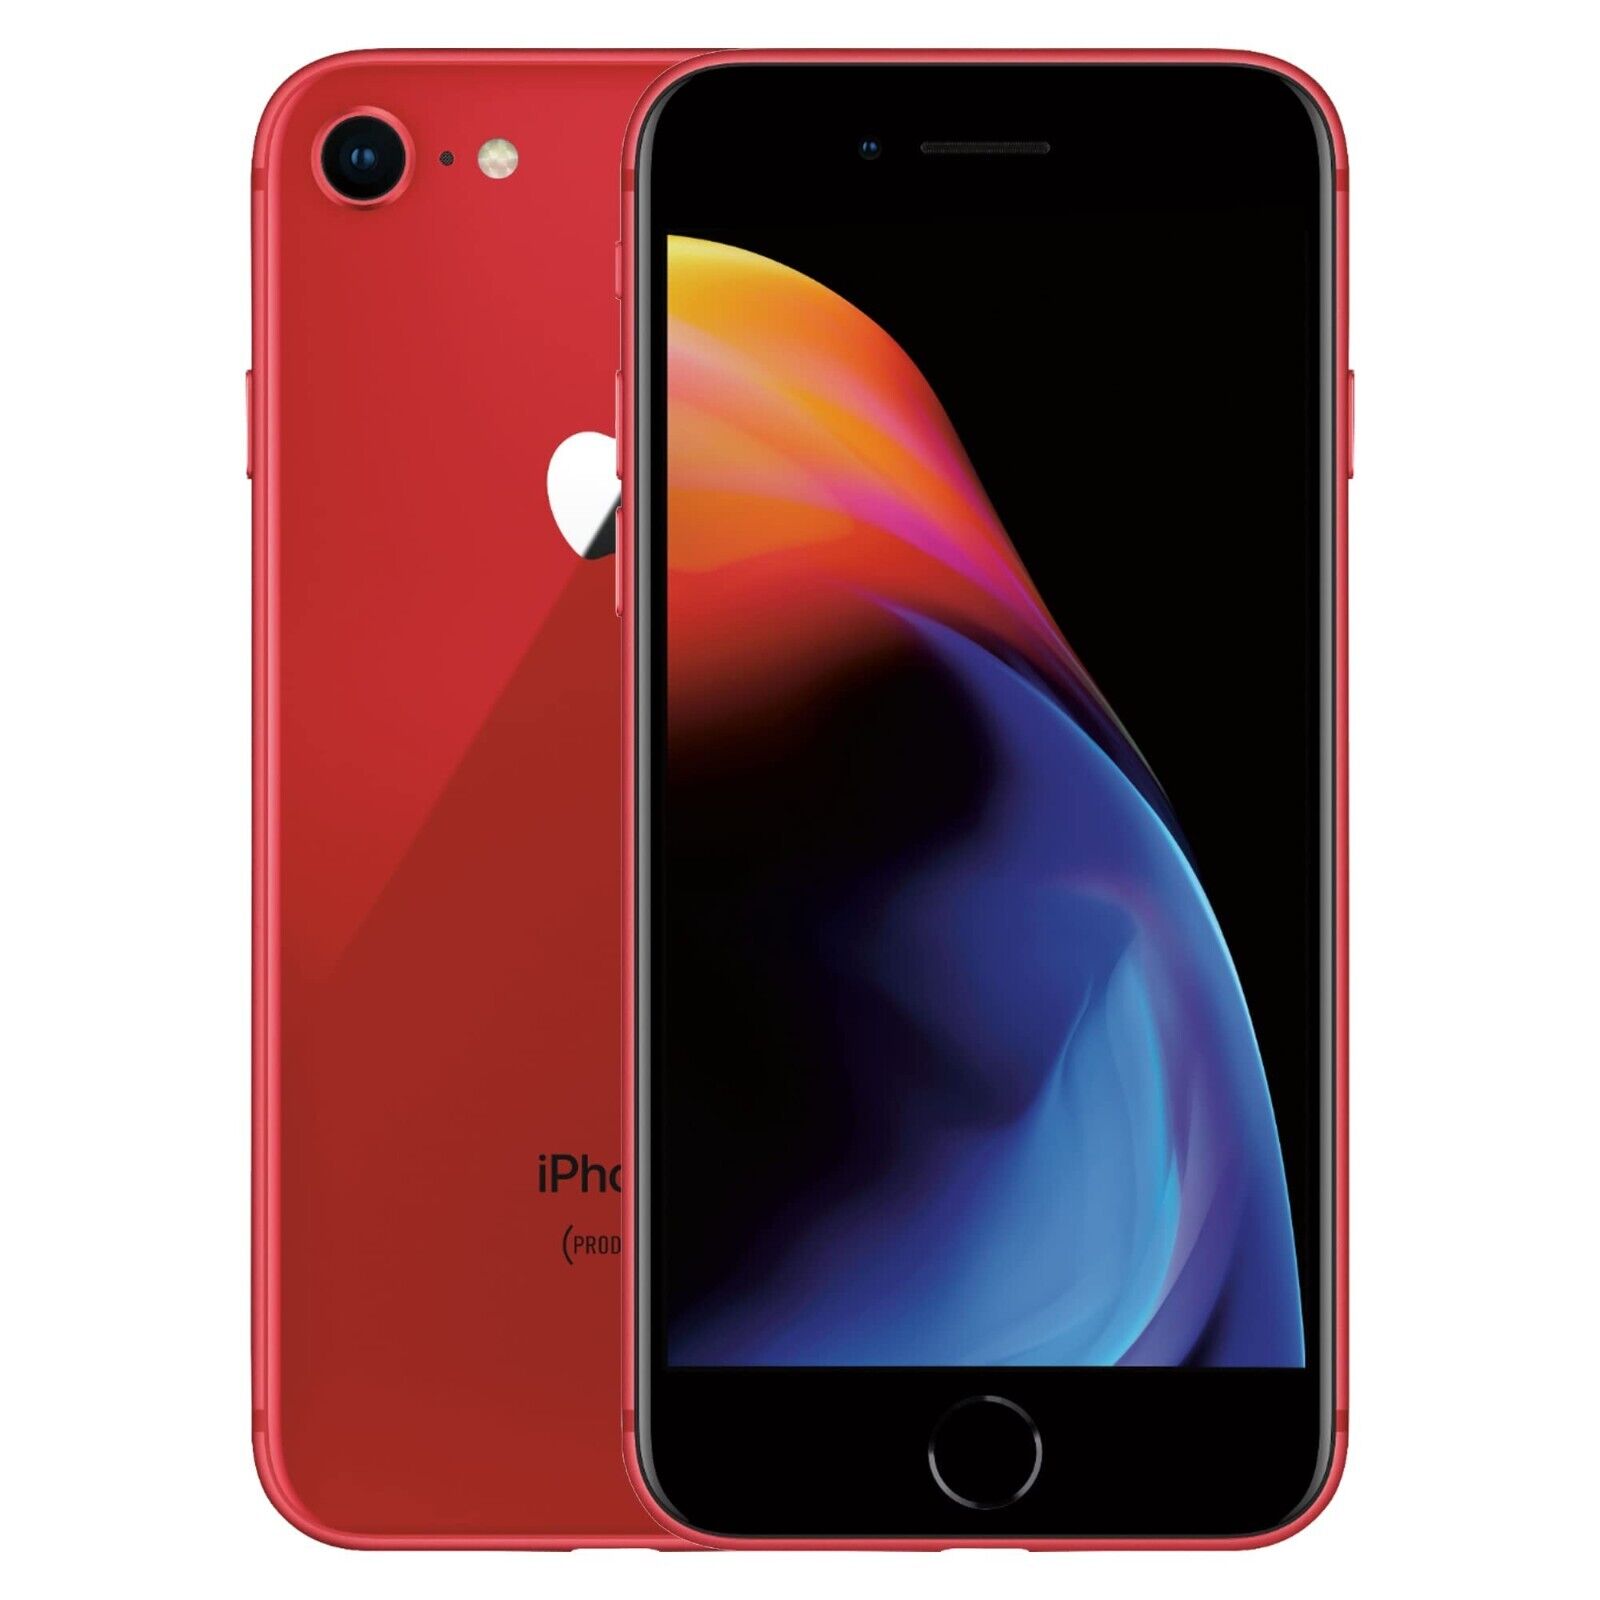 Apple iPhone 8 (4.7-inch) Smartphone (A1863) Unlocked - 64GB / Red Refurbished 2